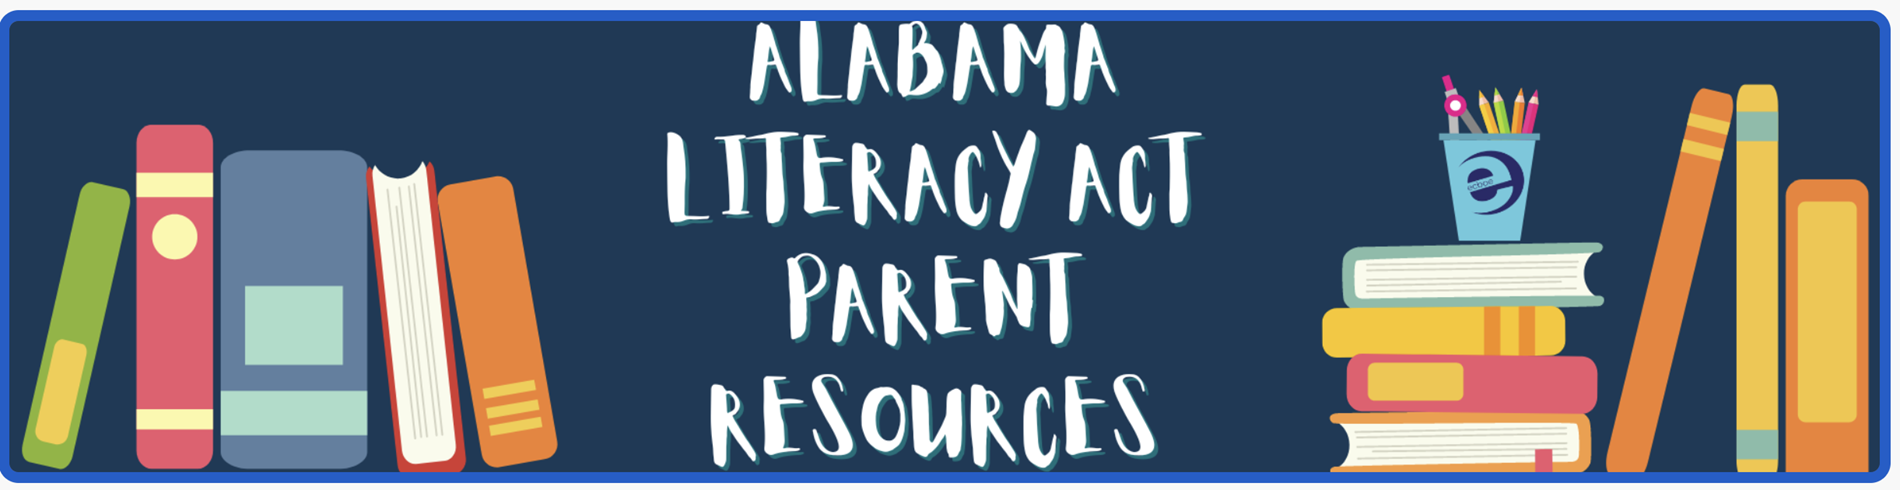 Literacy Act Resources 